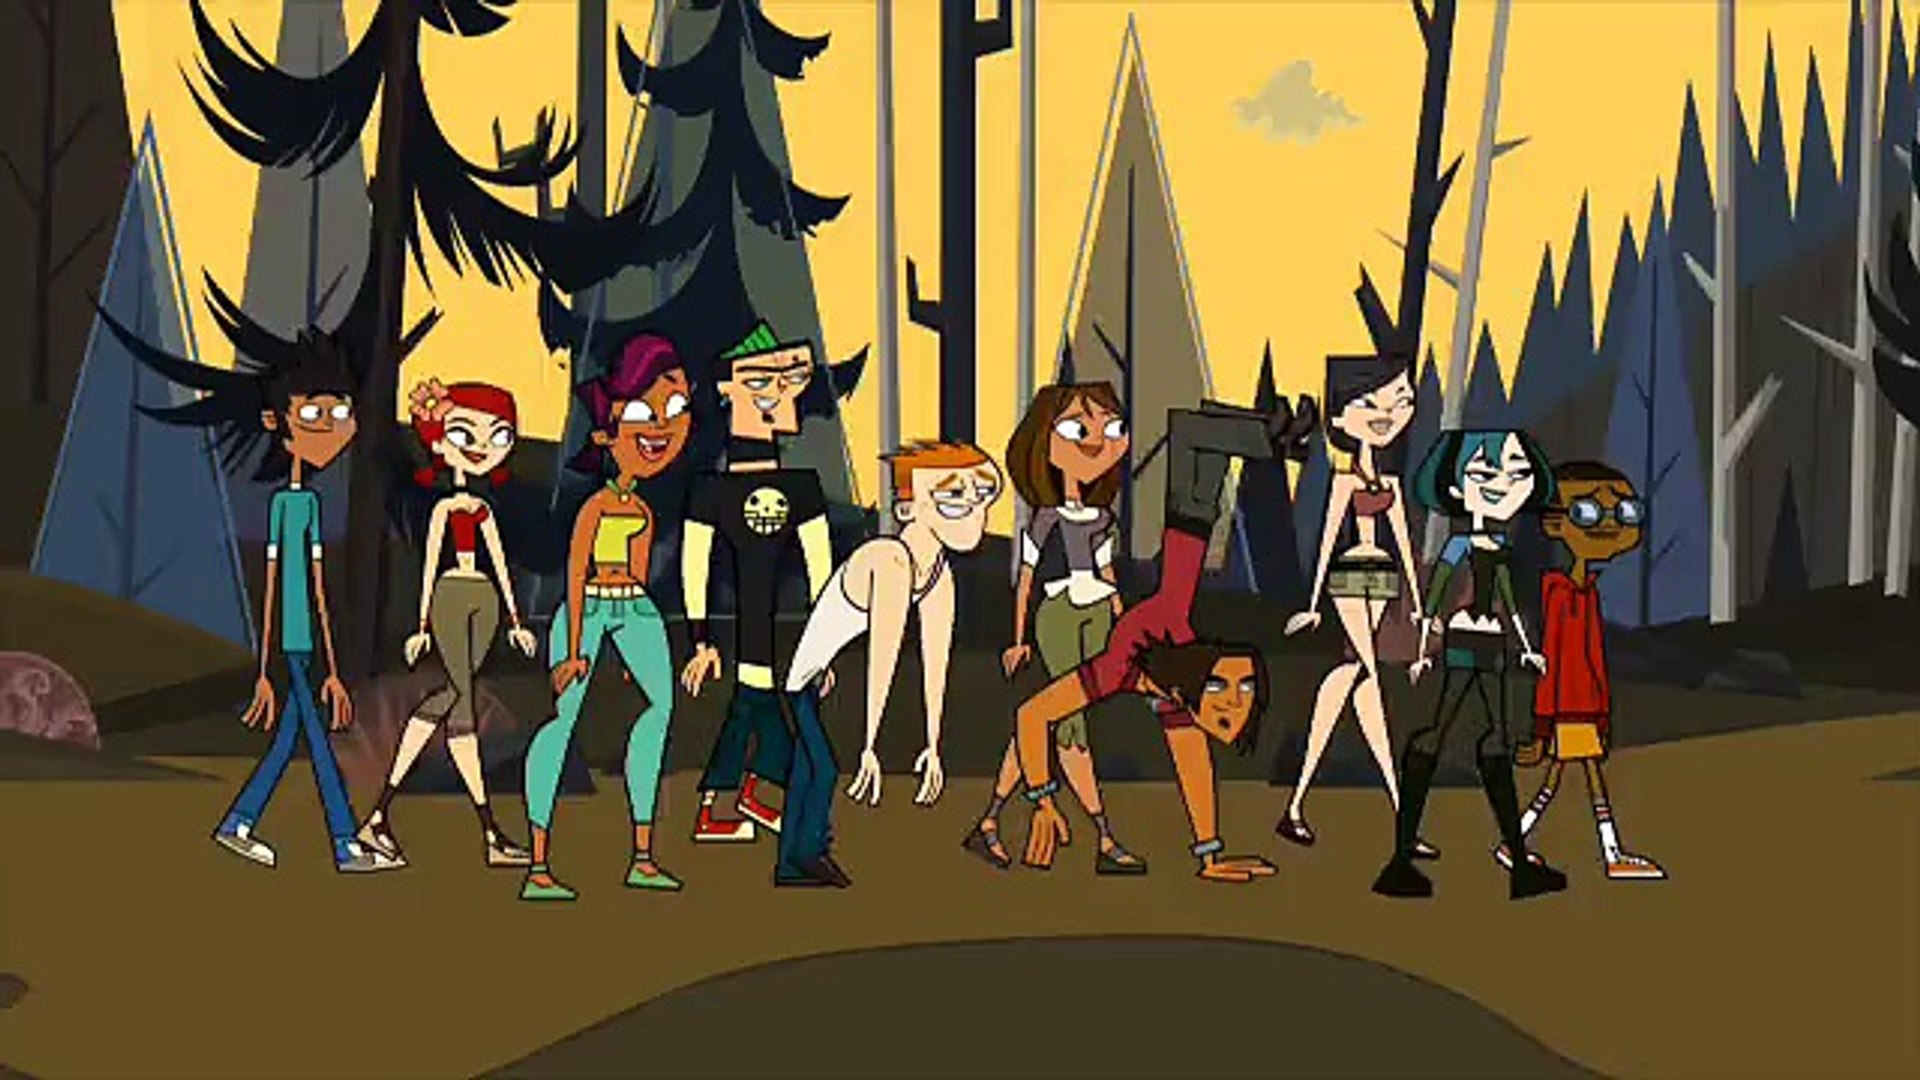 Total Drama: All Stars - Rotten Tomatoes